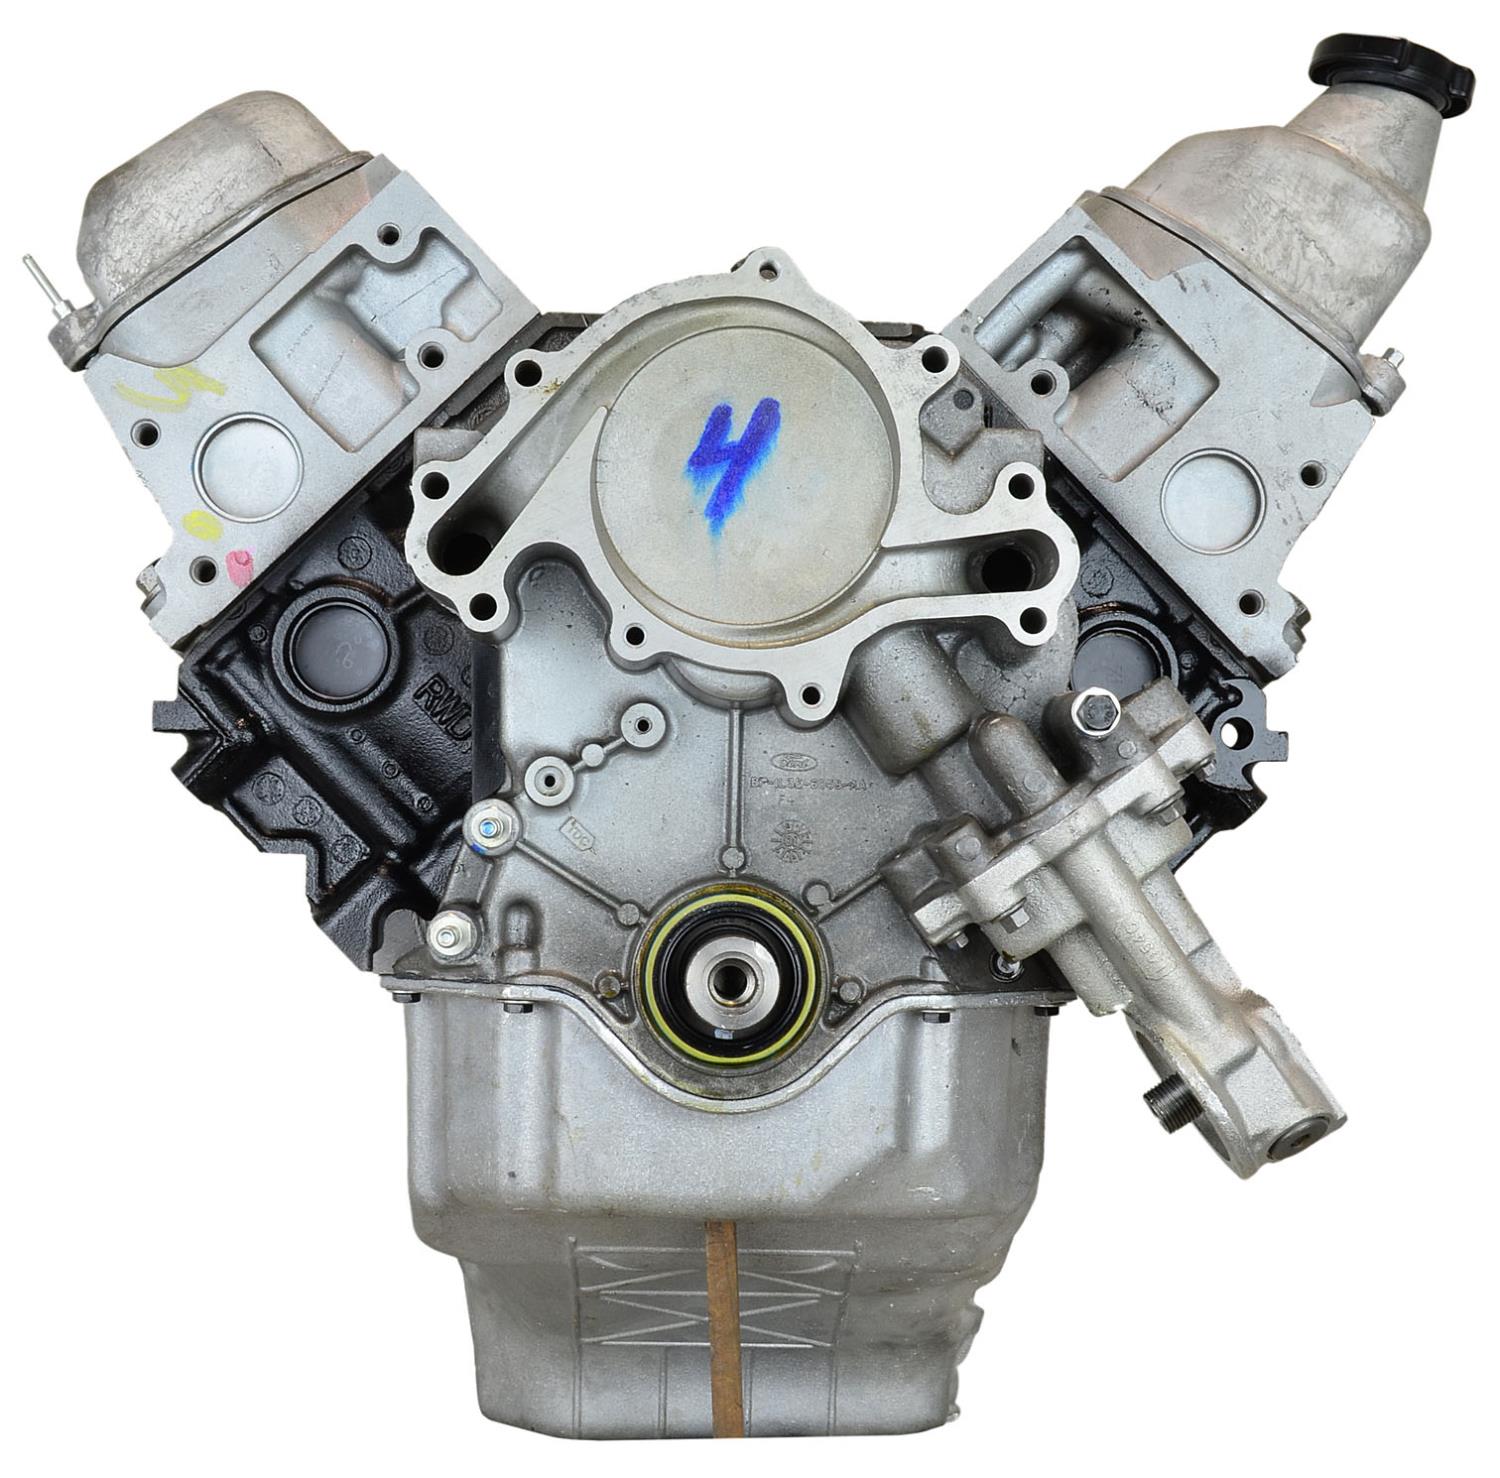 VFZY Remanufactured Crate Engine for 2001-2008 Ford F-Series Truck & E-Series Van with 4.2L V6